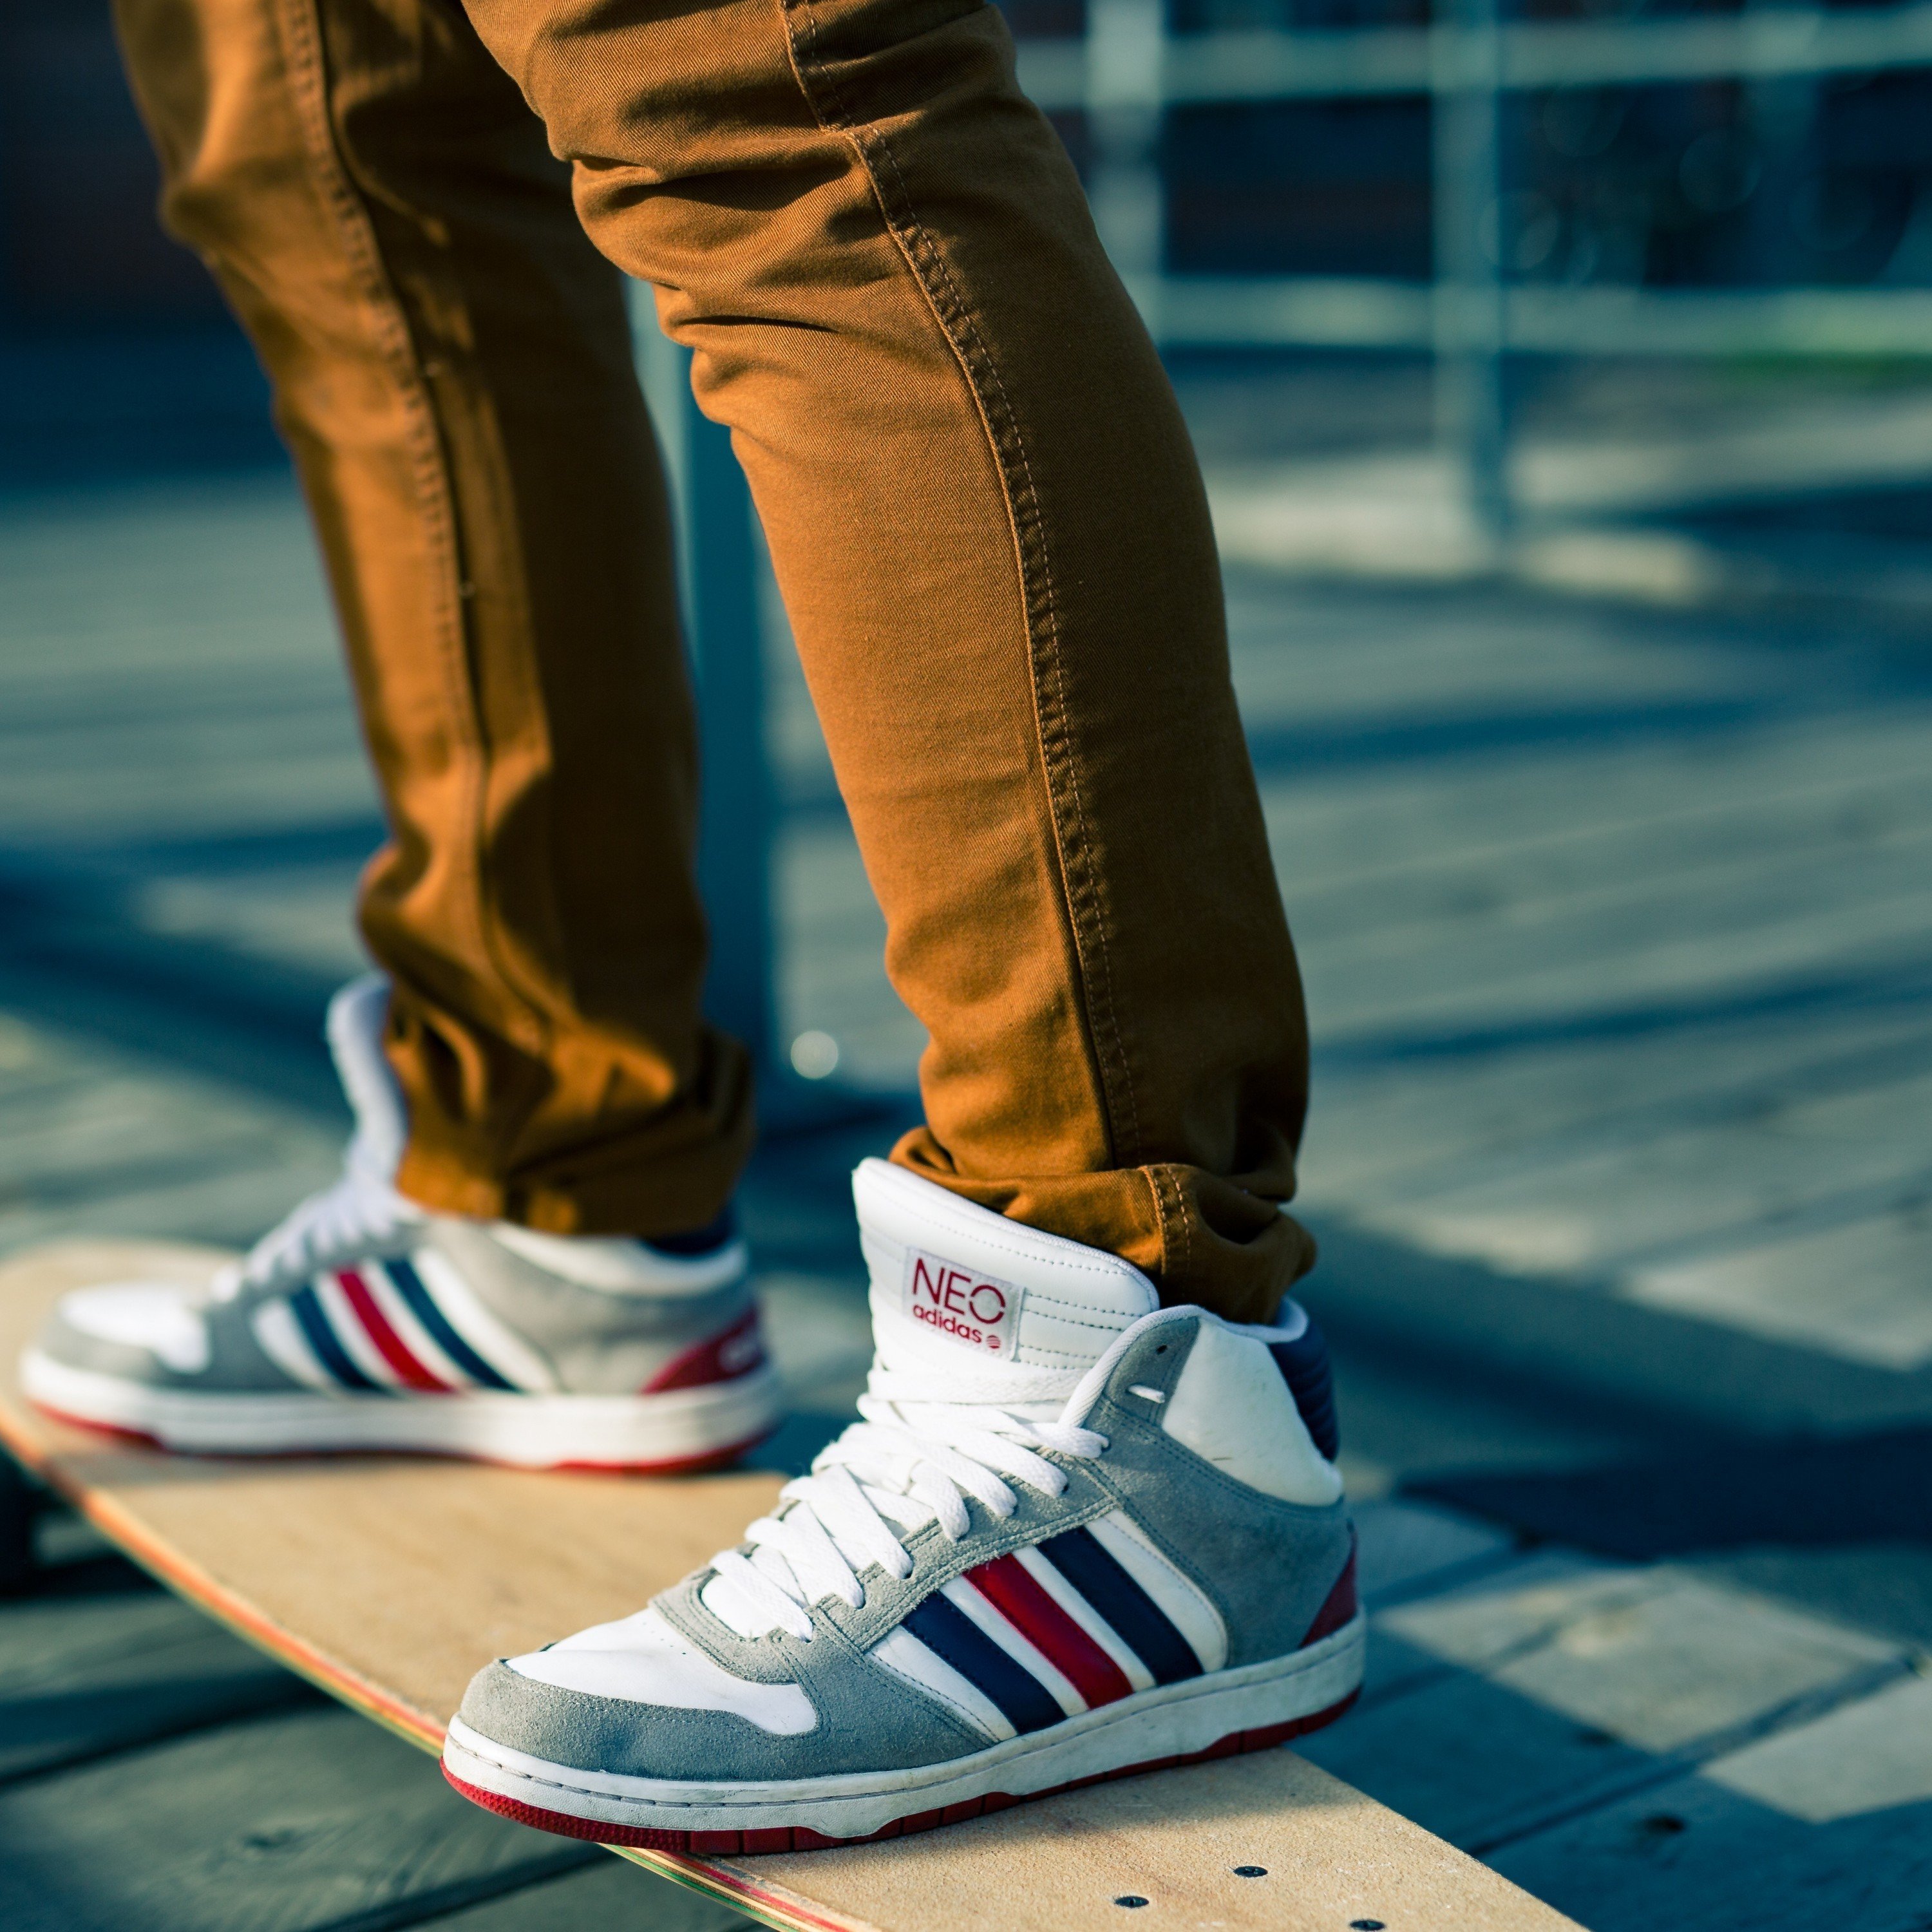 Download 3000x3000 Skateboard, Adidas Shoes, Focused Wallpaper